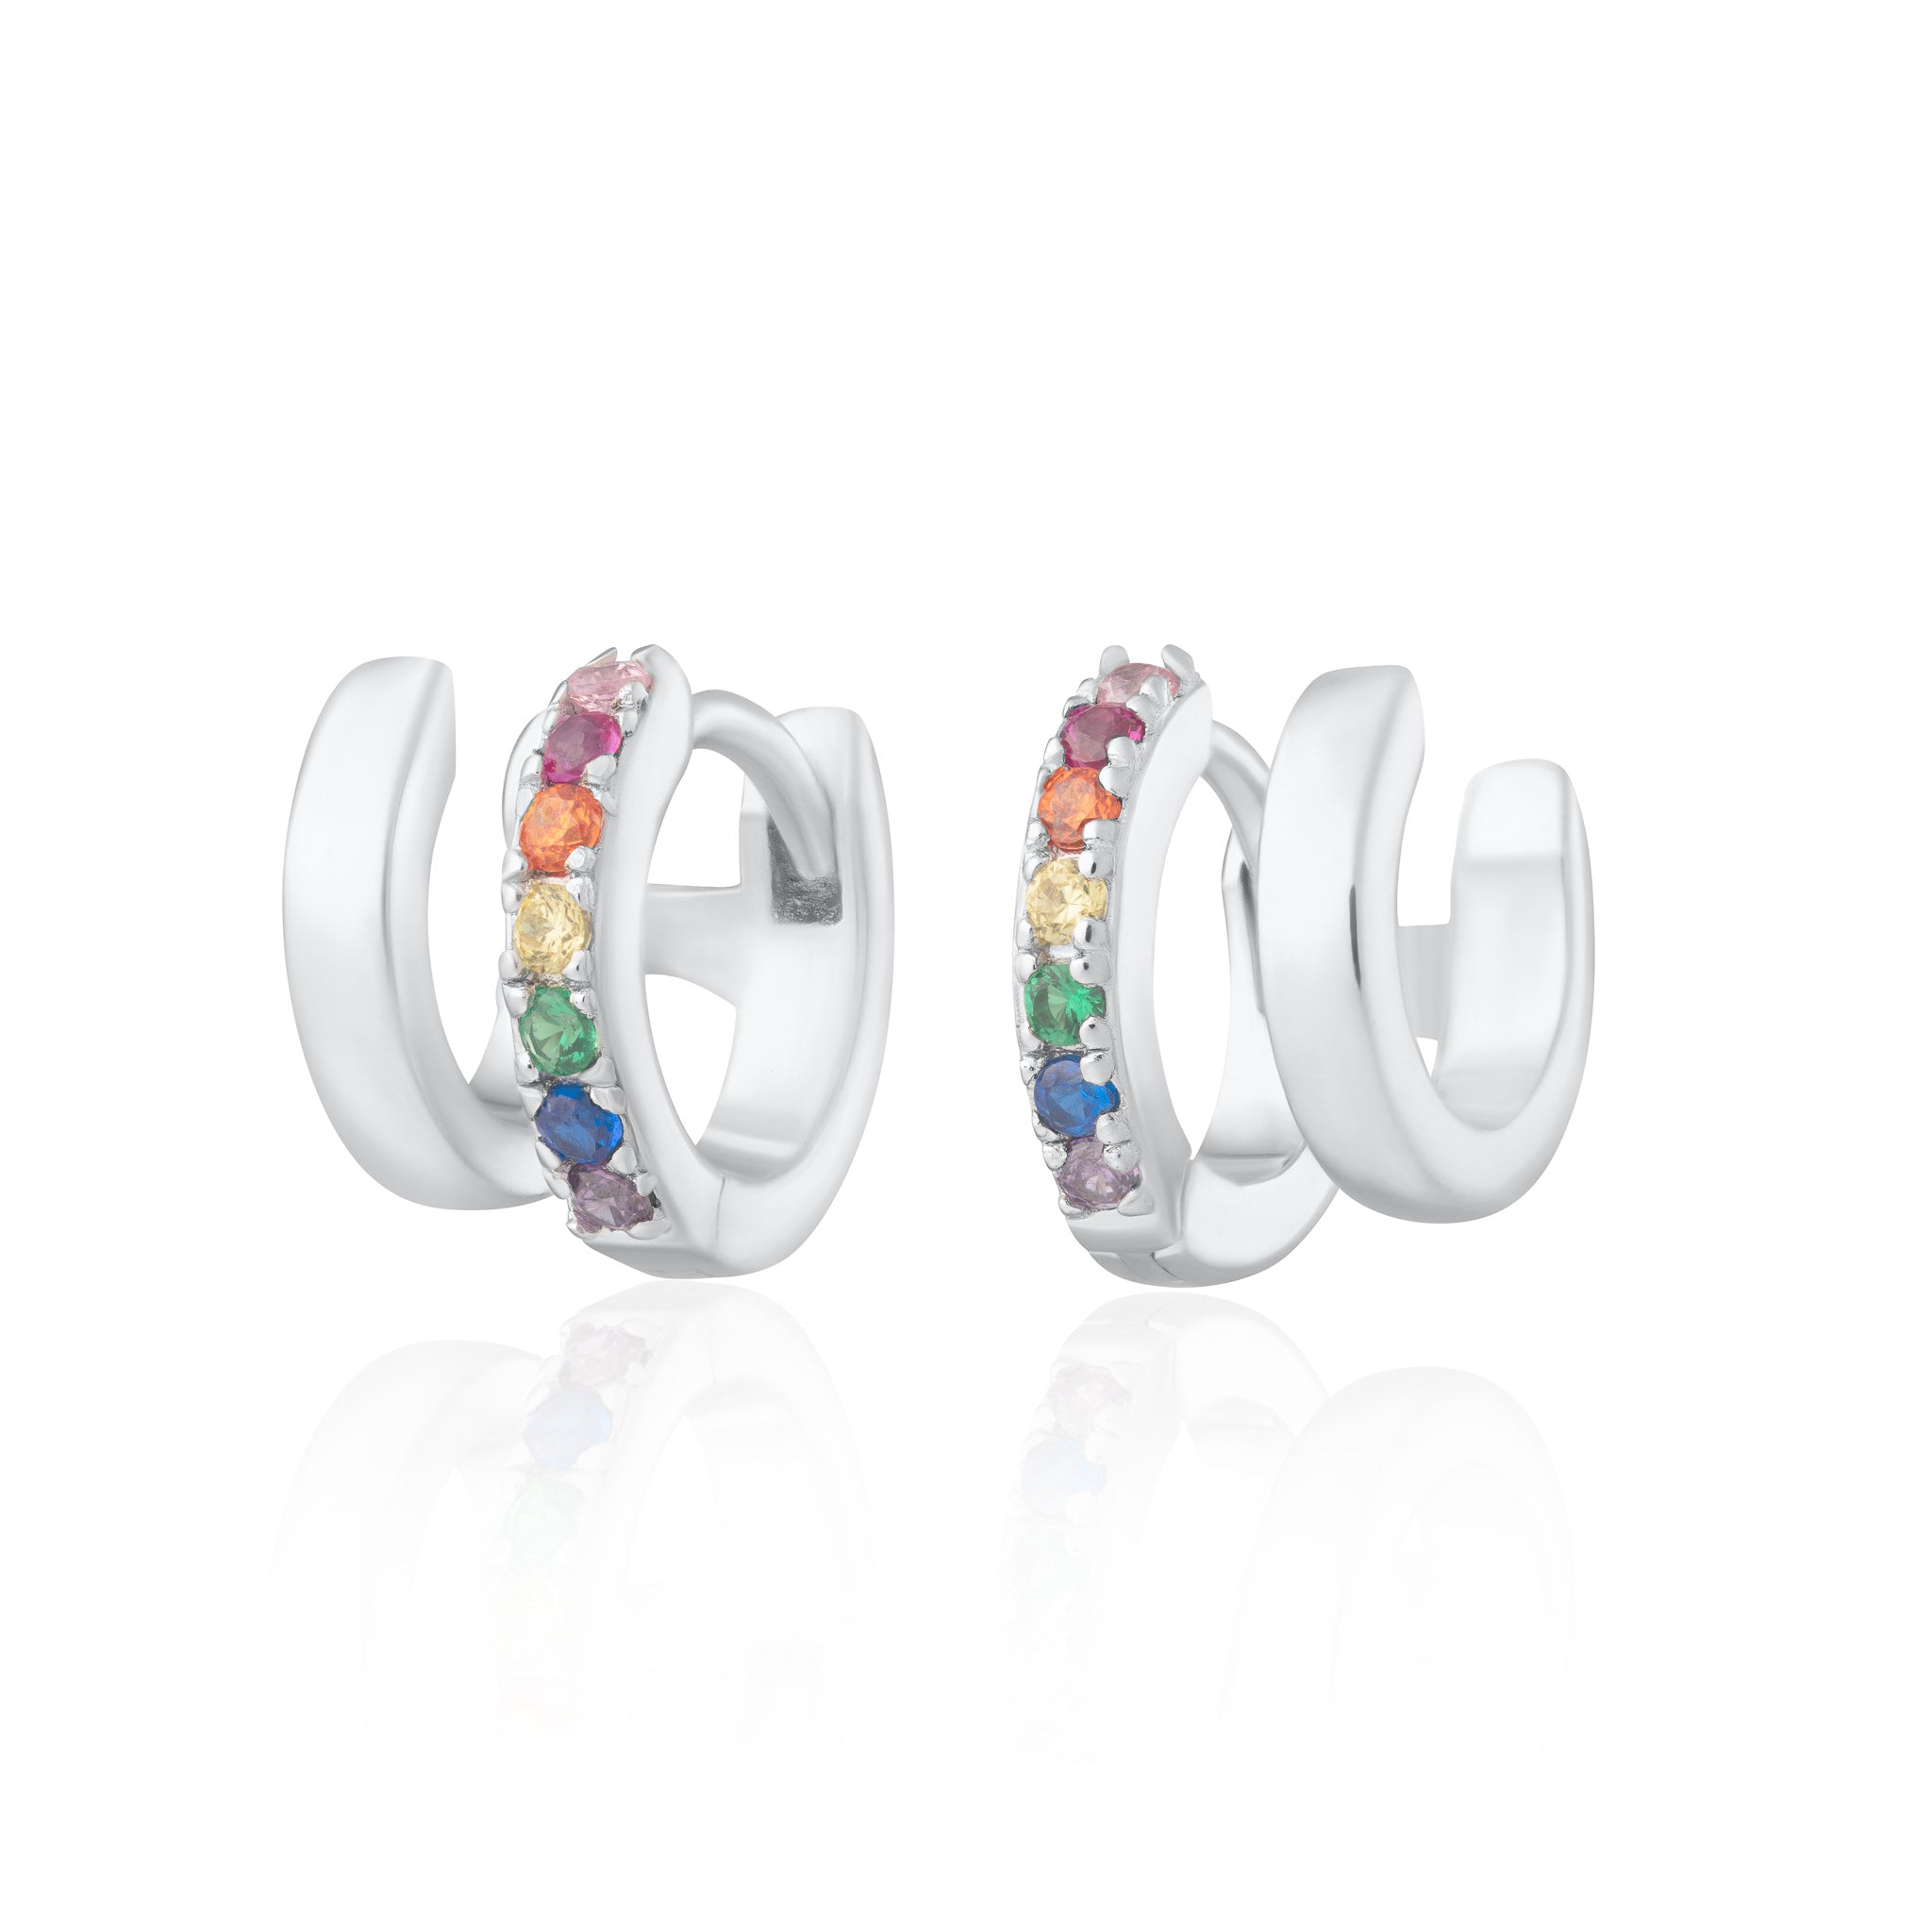 Mismatched Double Huggie Earrings with Rainbow Stones